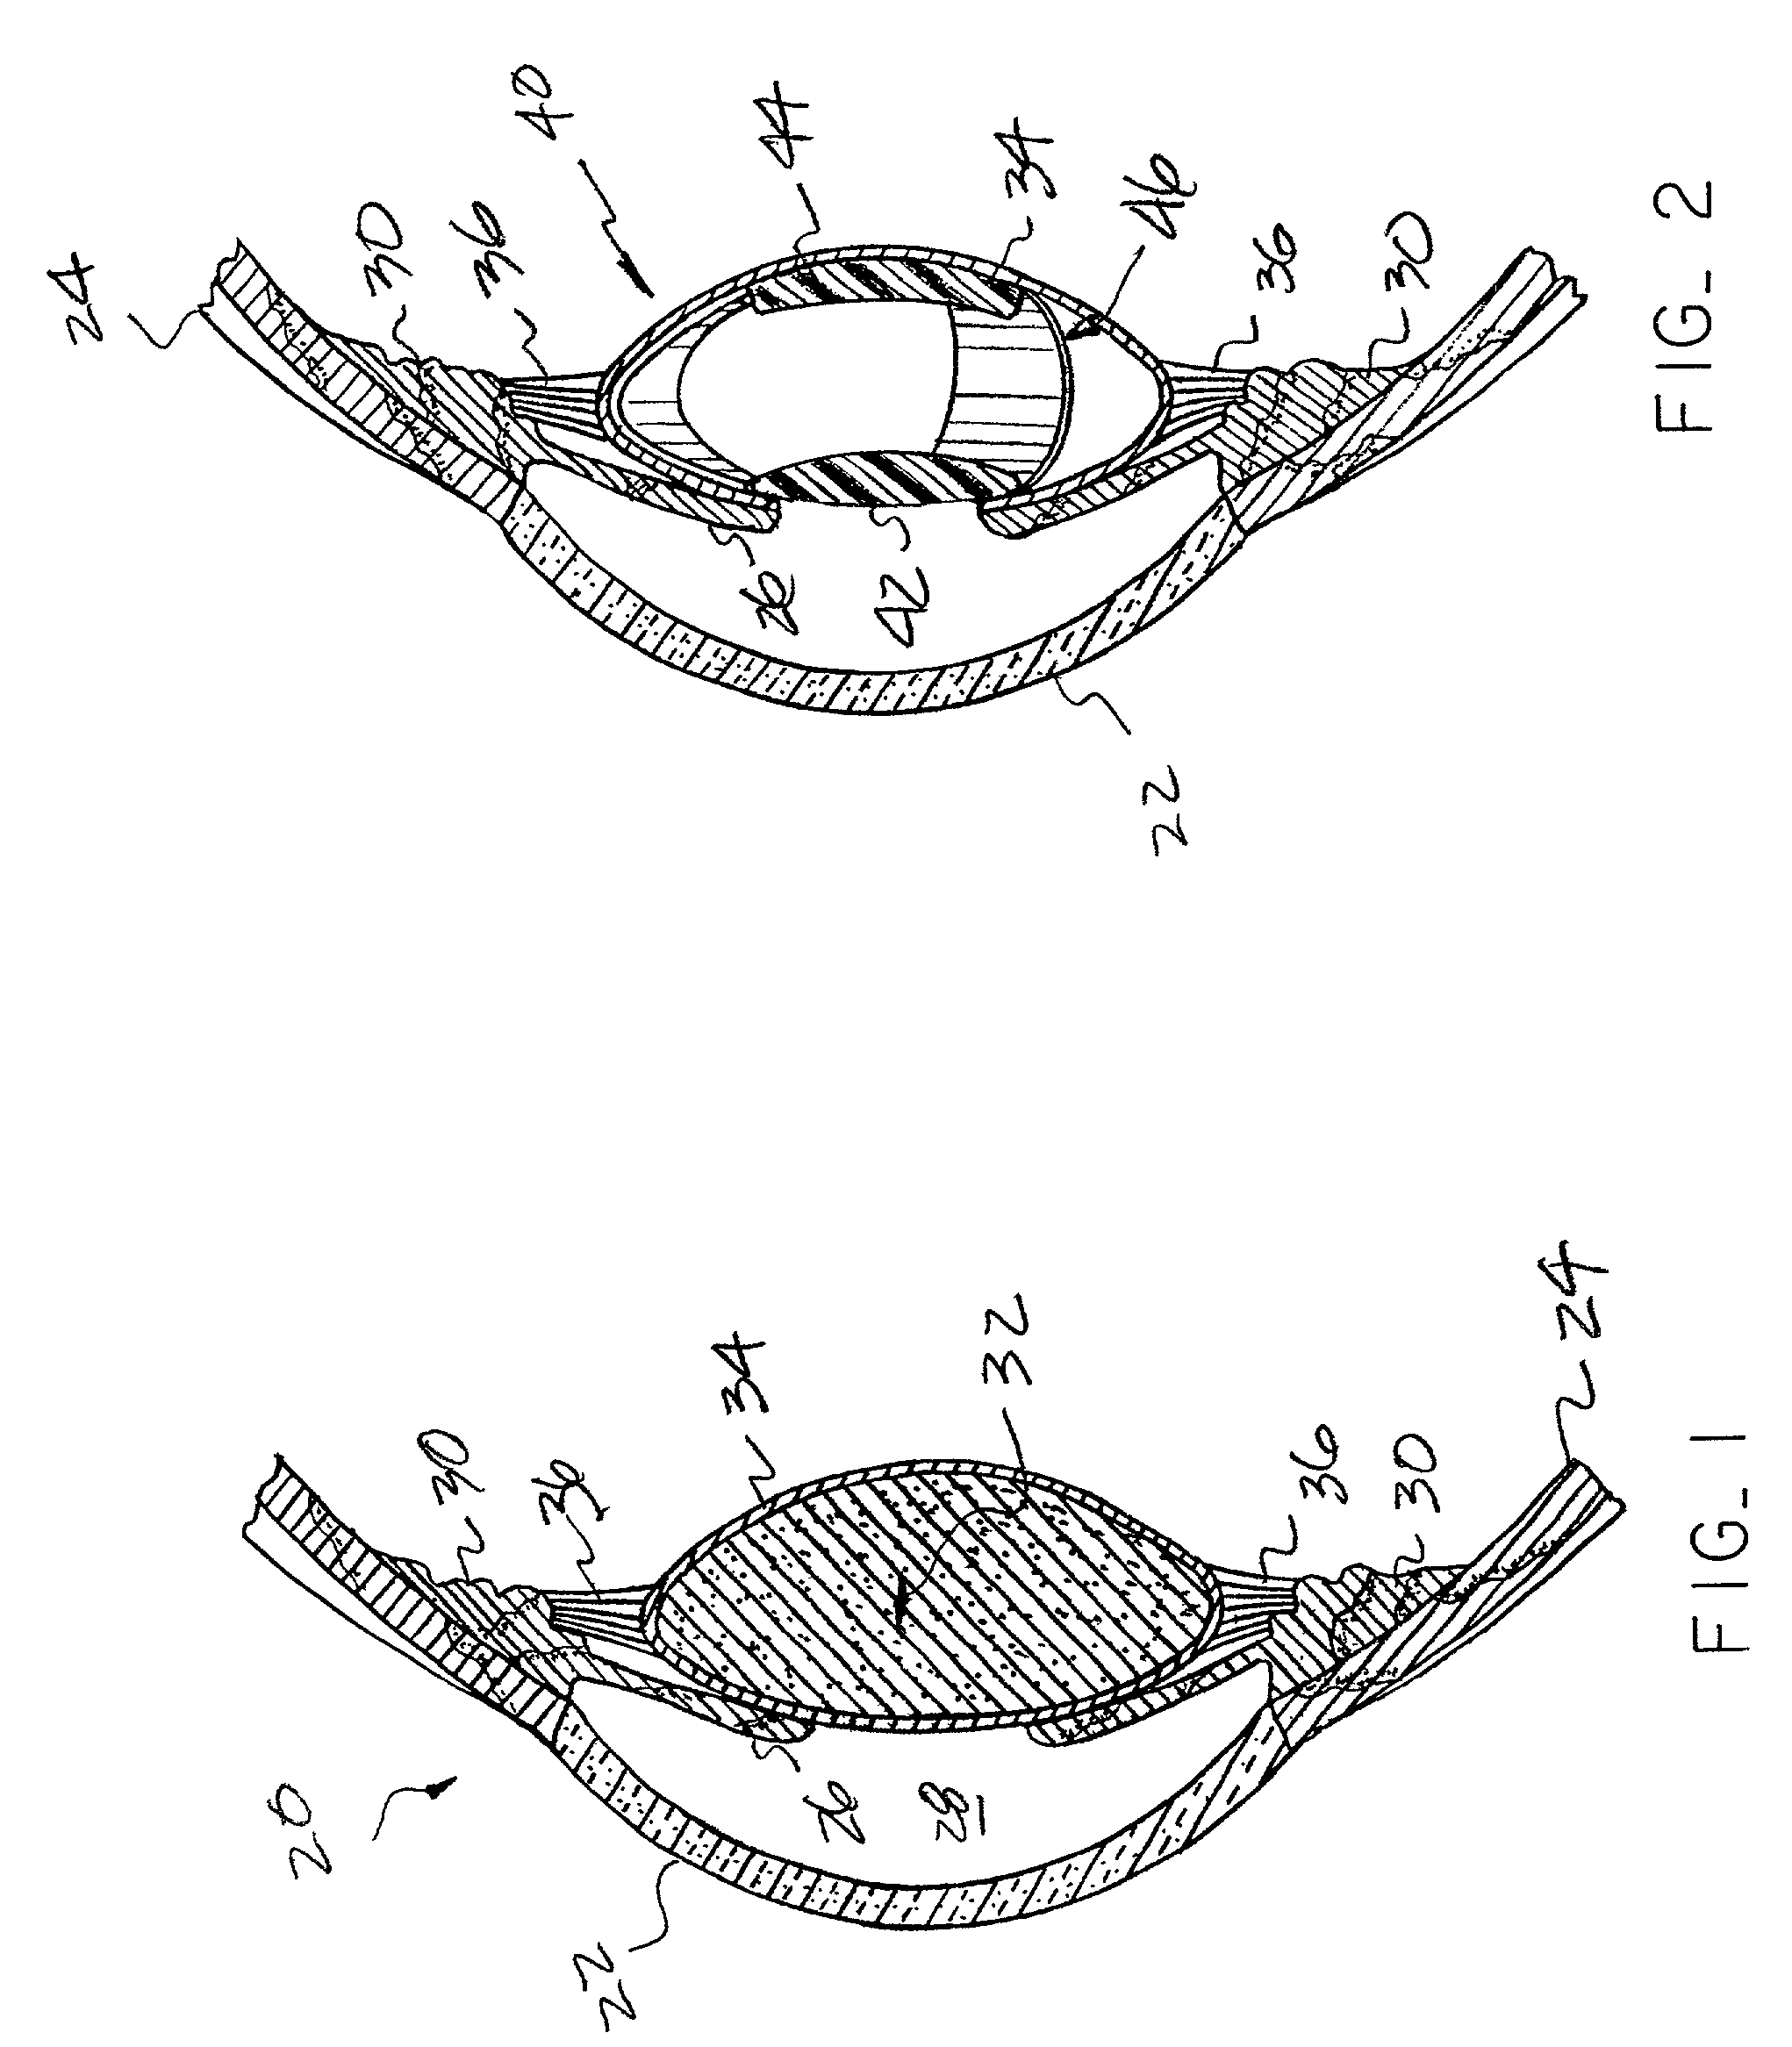 Open chamber, elliptical, accommodative intraocular lens system